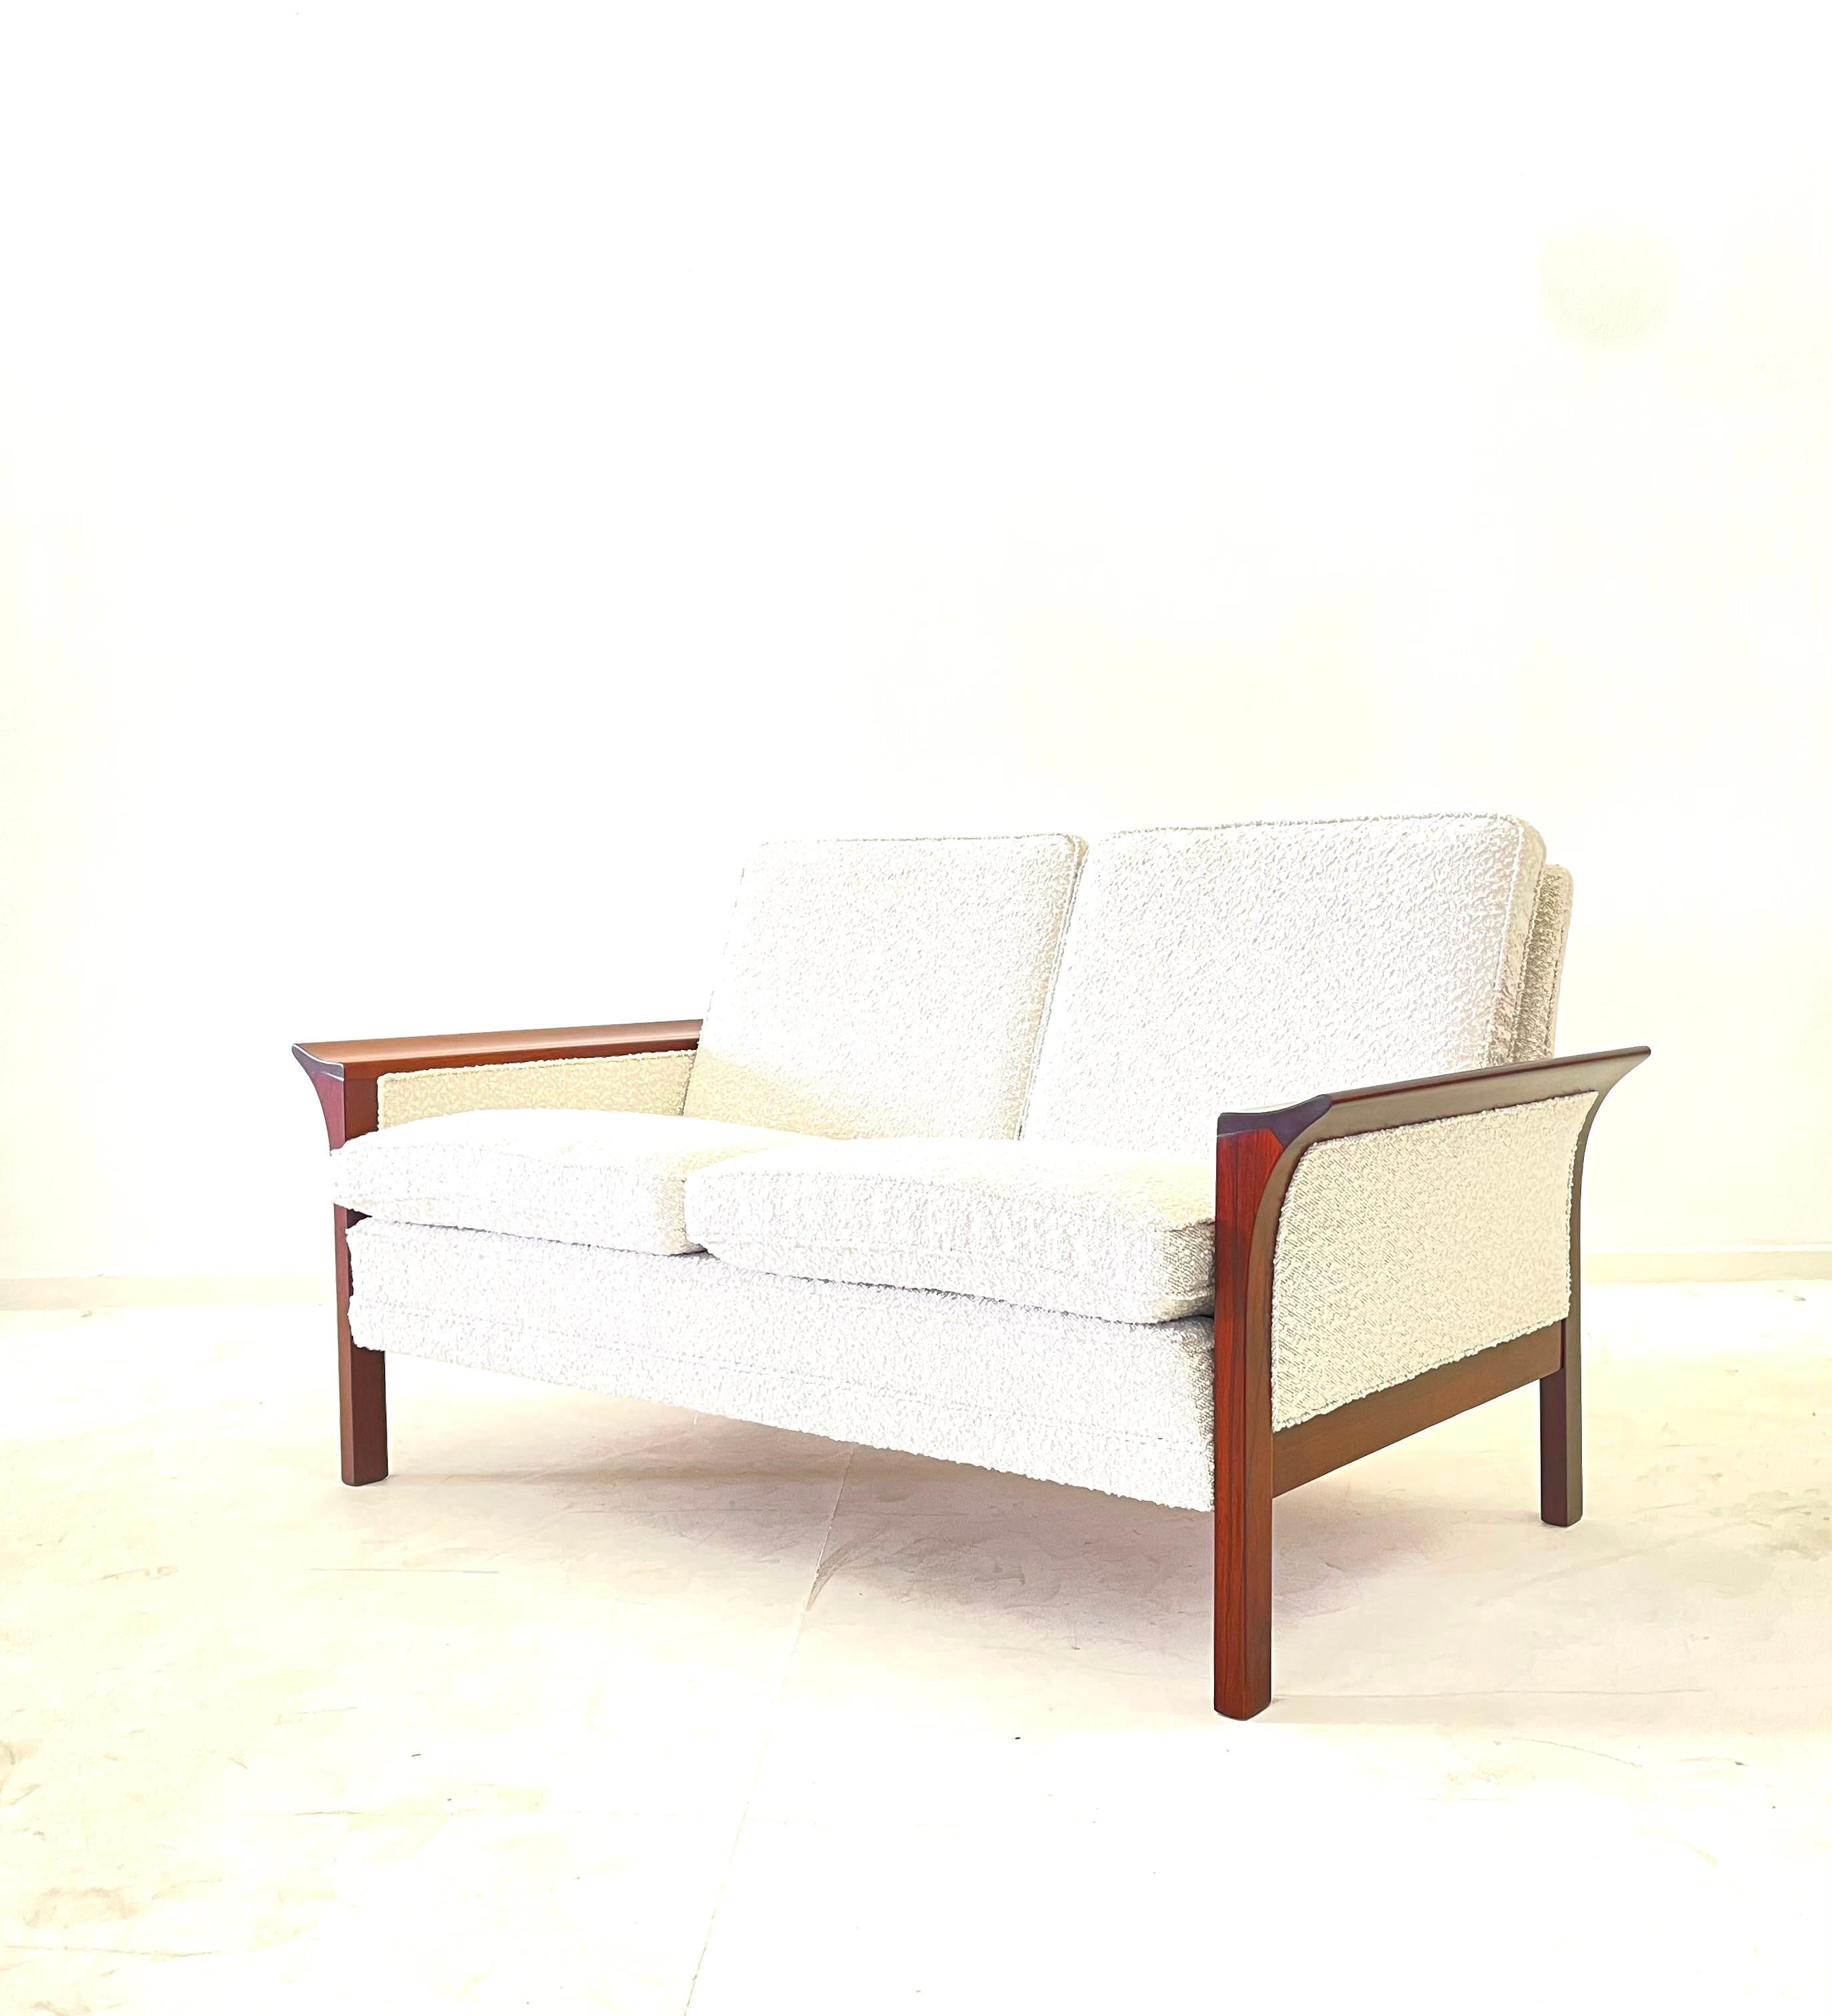 Mid Century Danish Modern rosewood 2 seater sofa
Probably by  Hans Olsen

Totally restored. New Upholstery in new bouclé fabric

The sofá is in mint condition. It was professionally  restored to it’s original quality standards. Refinished with a